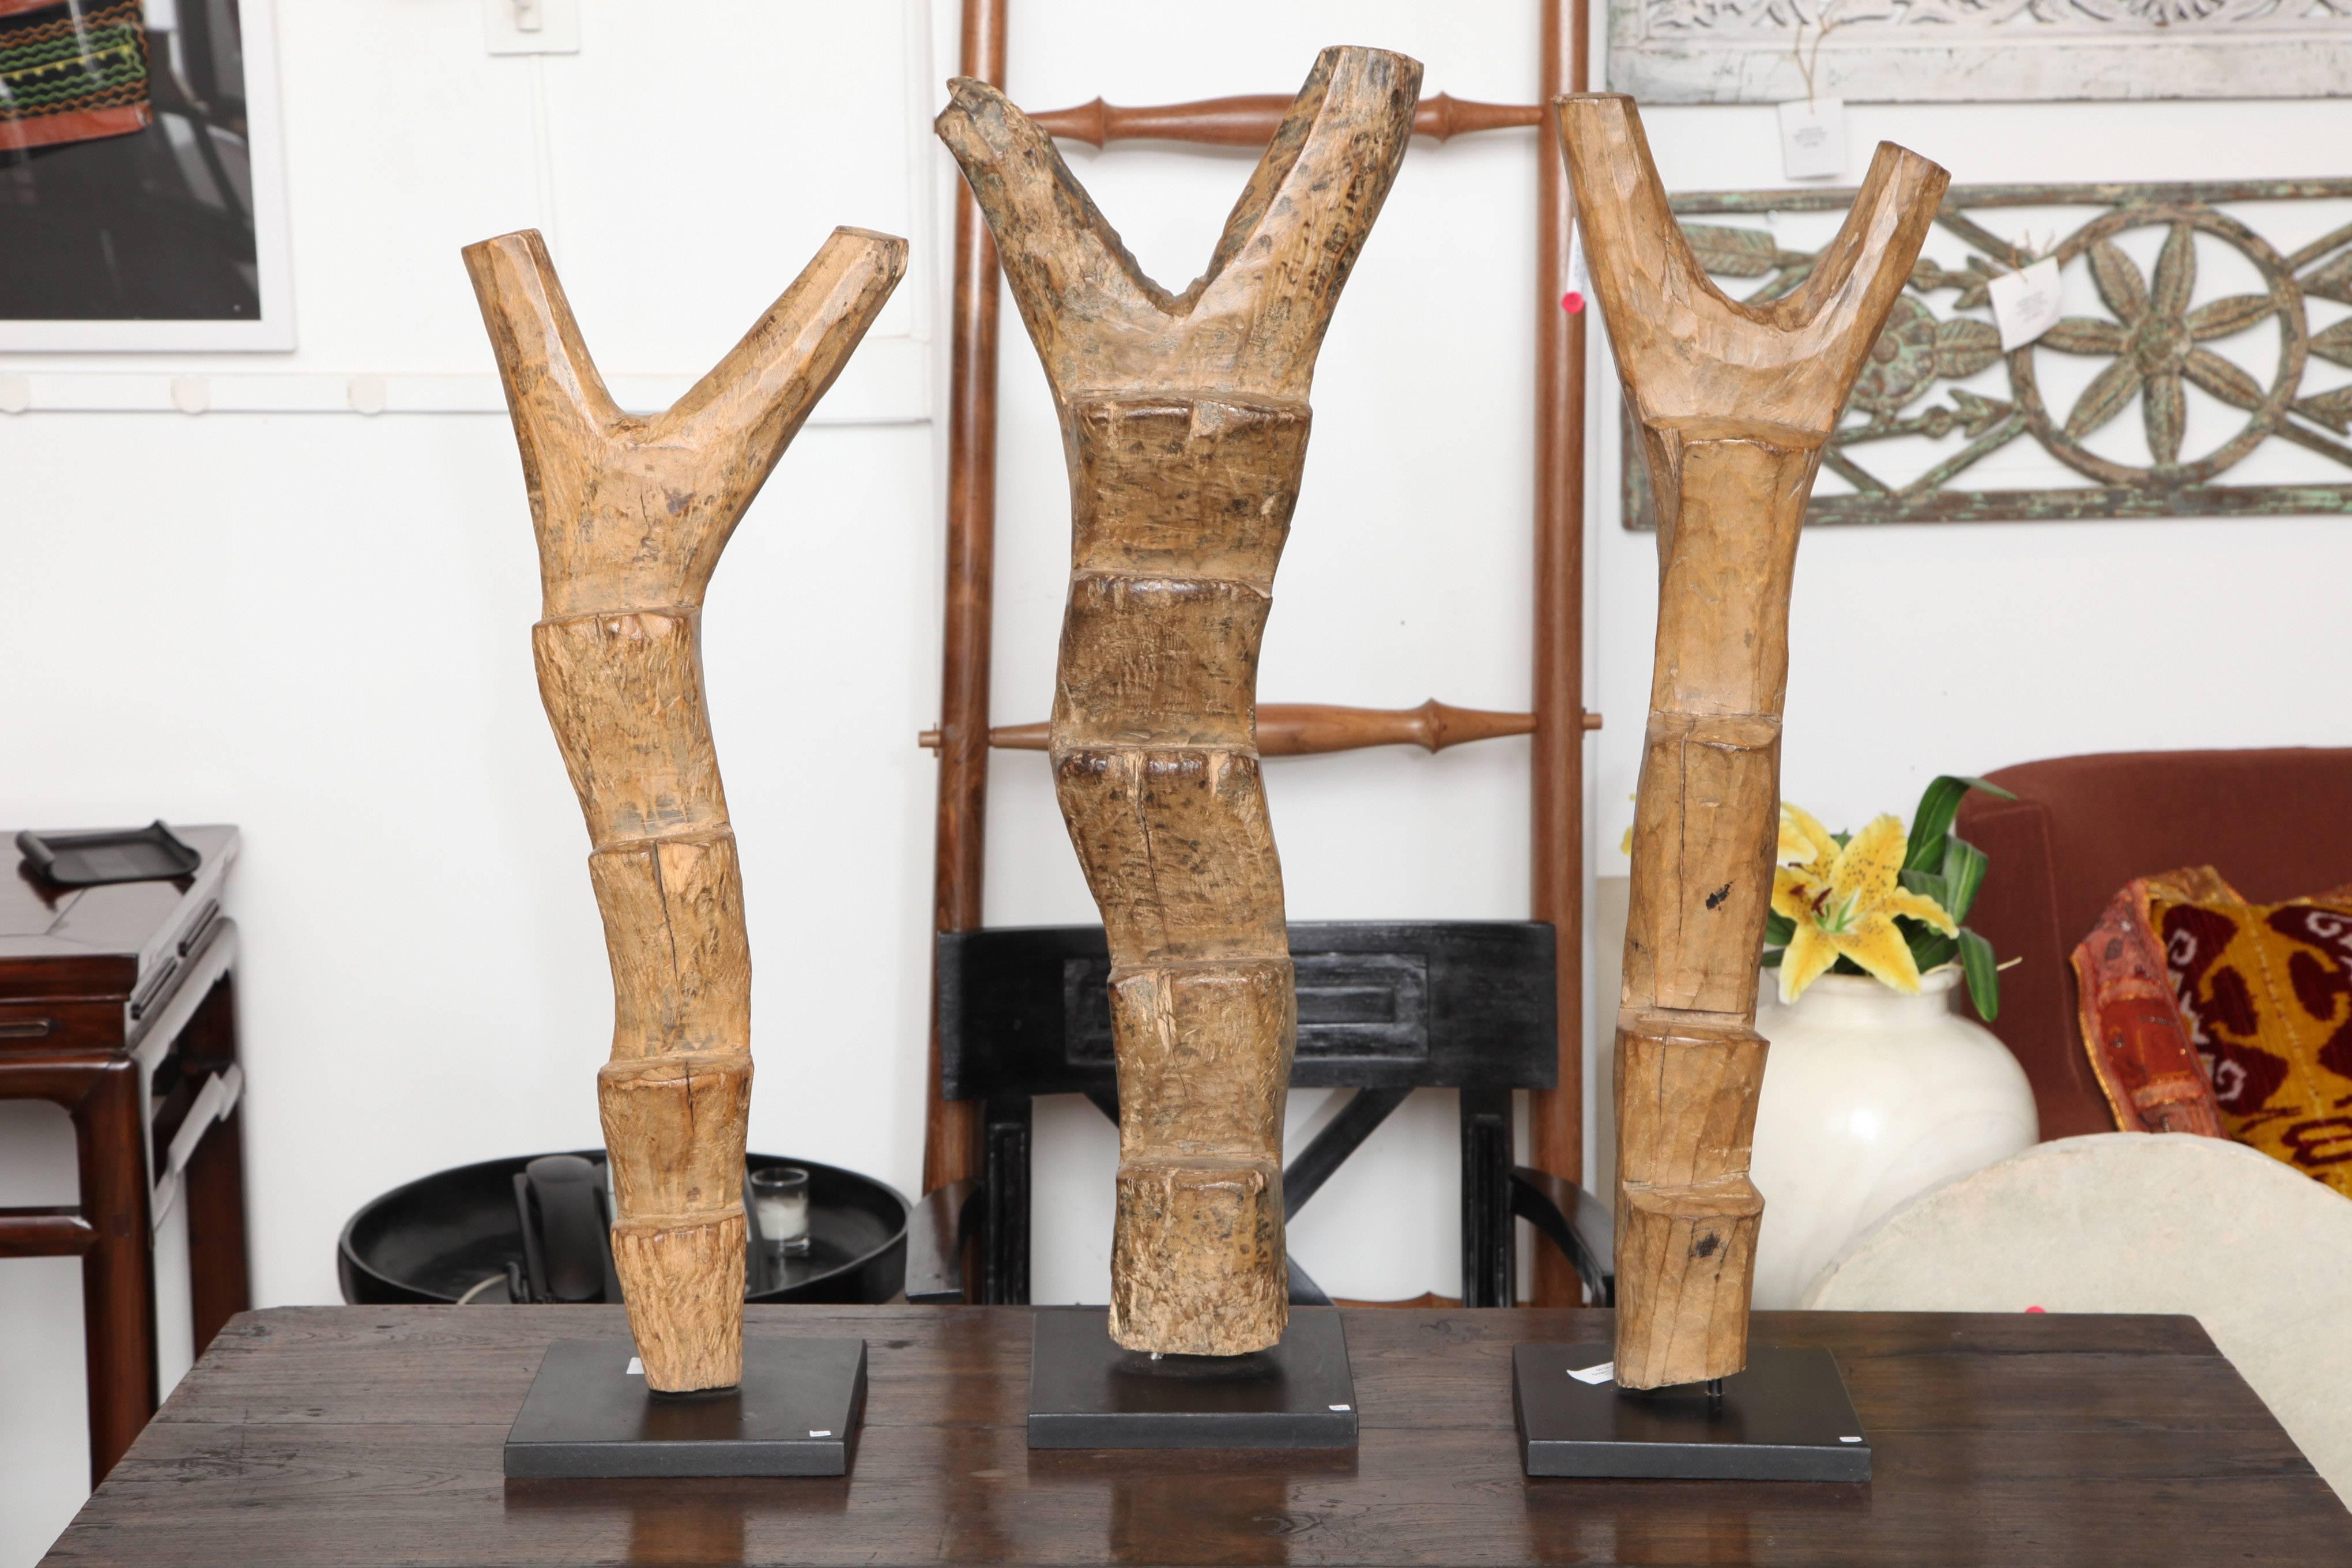 A selection of model Dogon ladders, mounted. Replicas of mush larger hand-hewn ladders traditionally used by the Dogon peoples of Mali to access cliff Dwellings. Dimensions vary. Tallest dimensions shown below. Sold separately.